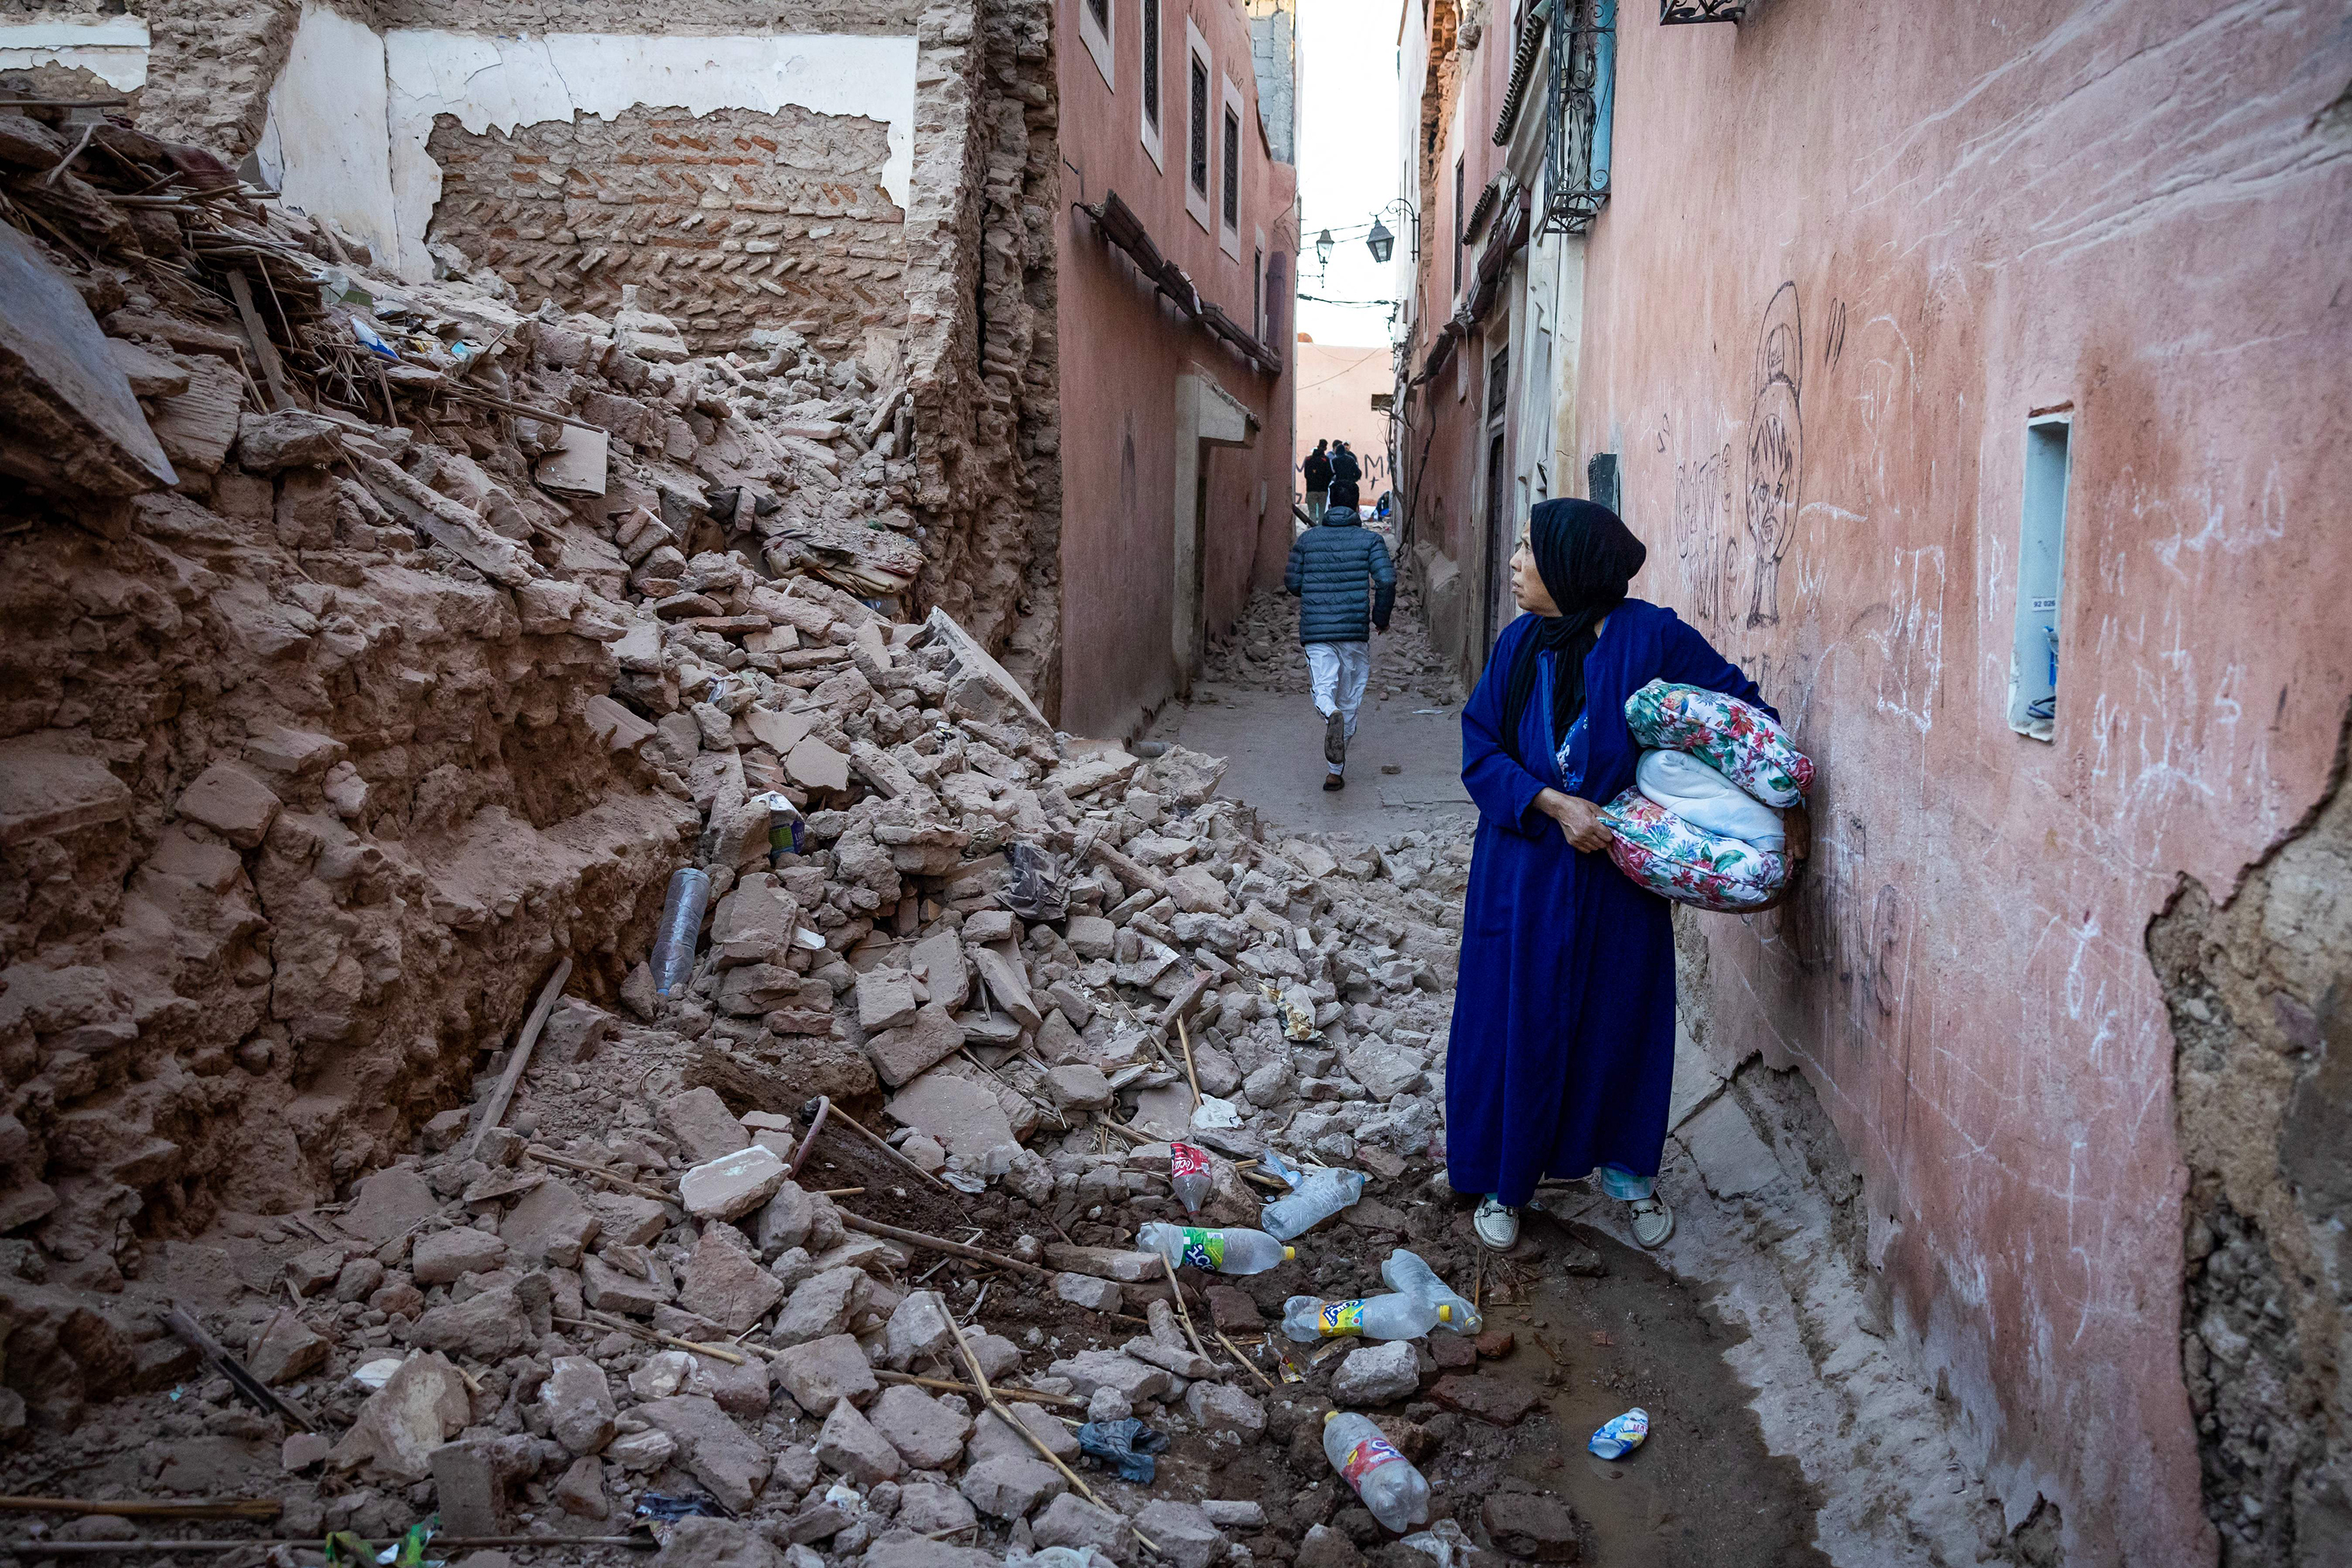 A woman looks at the rubble of a building in the earthquake-damaged old city in Marrakesh on September 9.